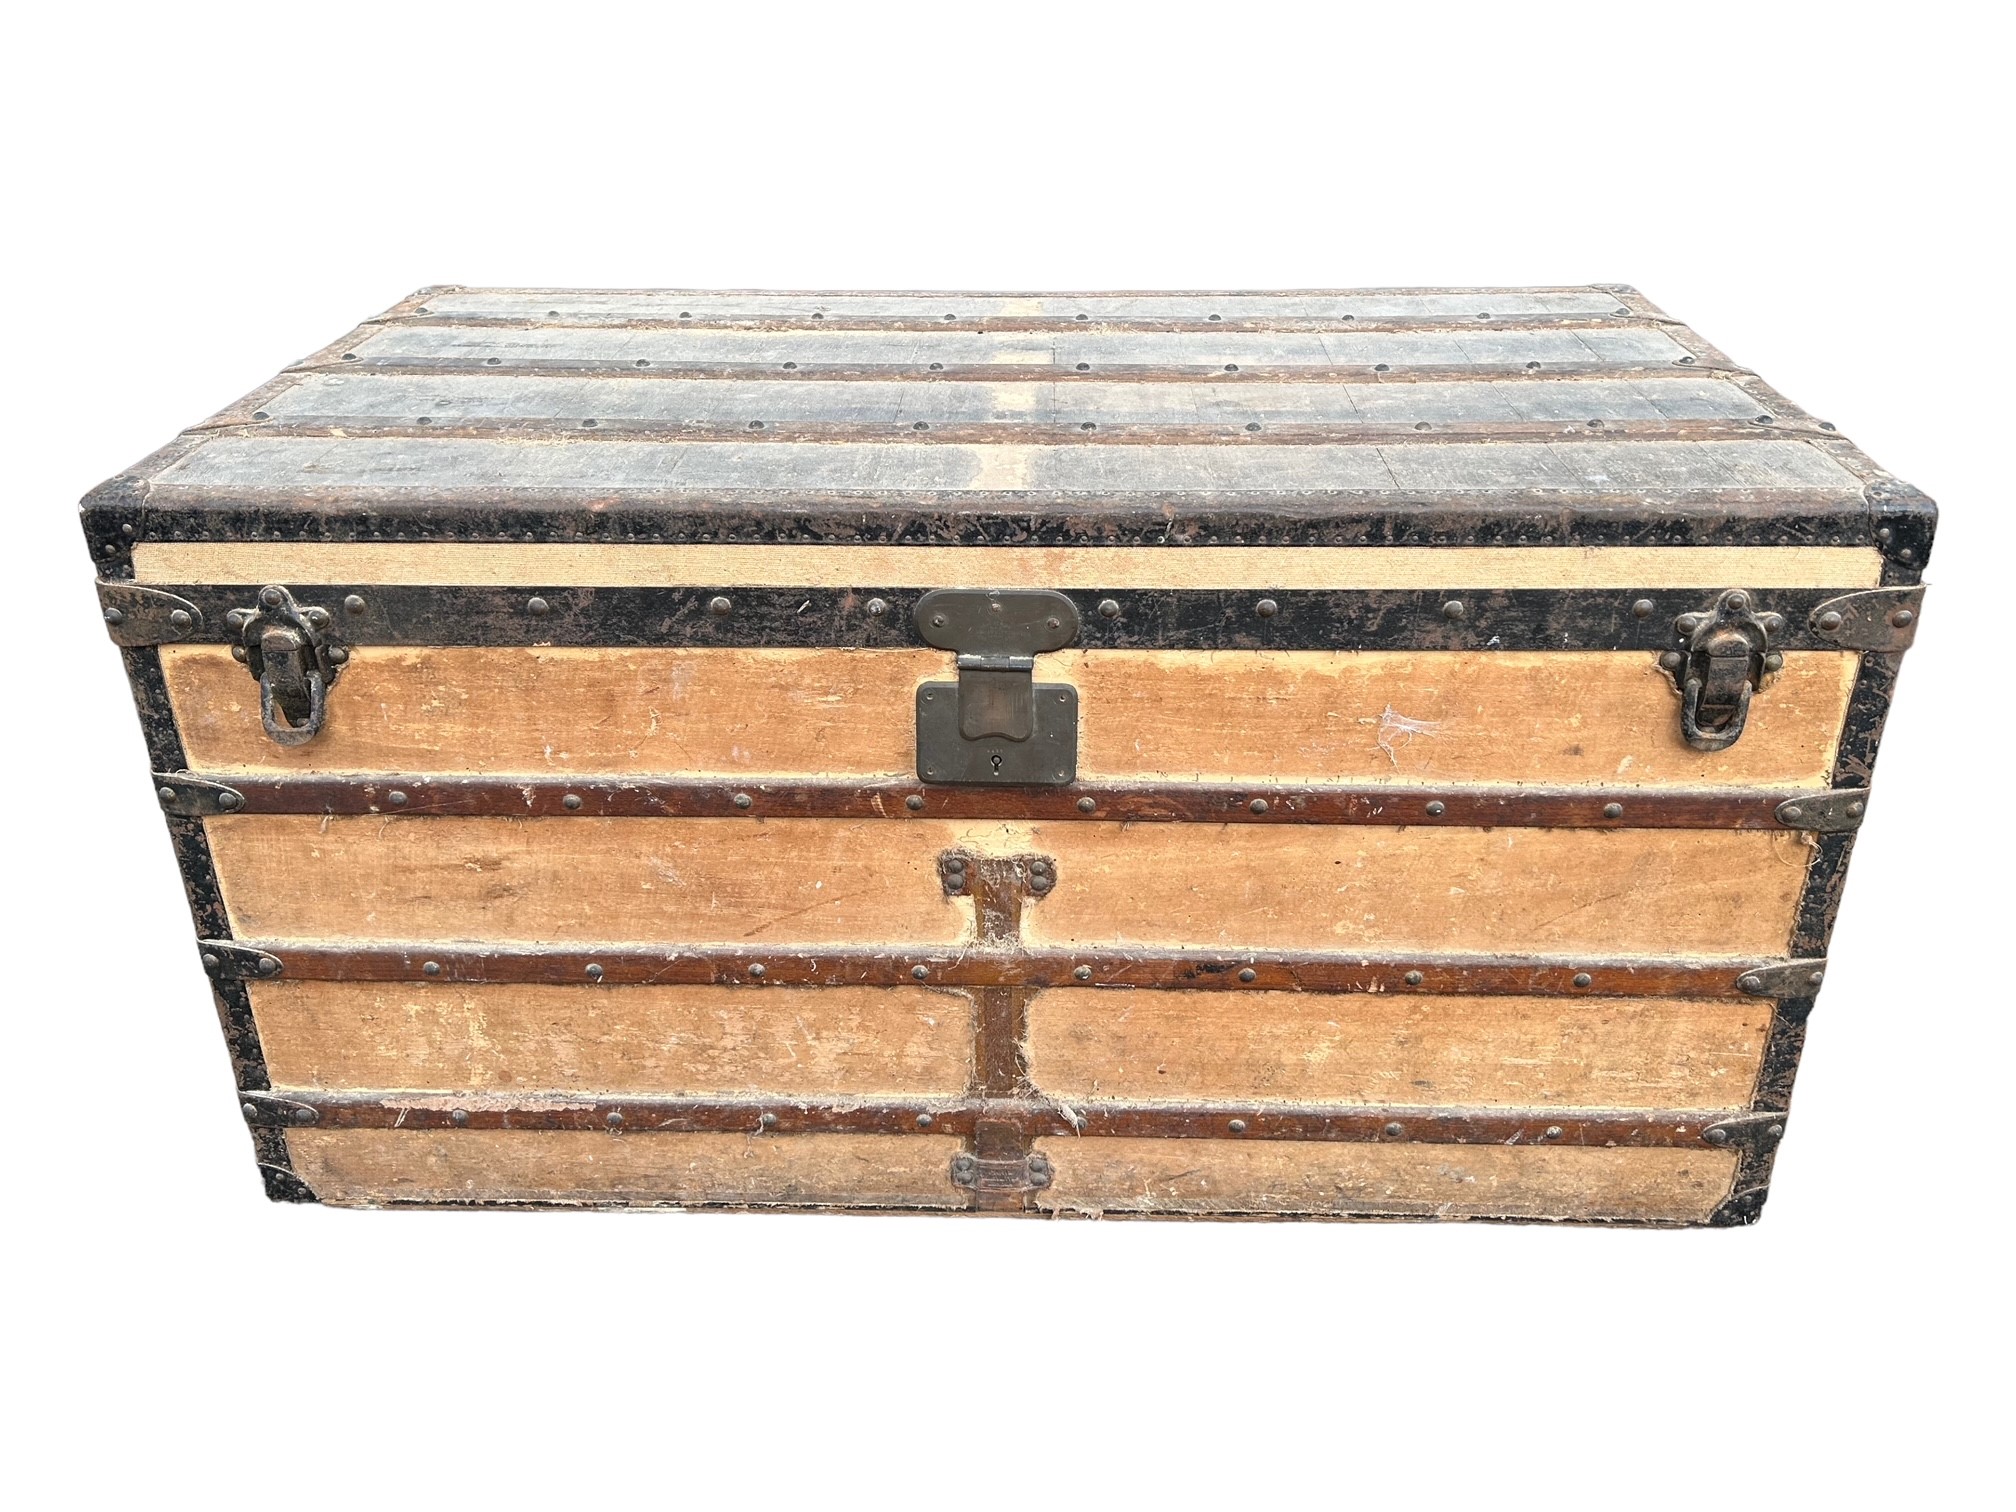 LOUIS VUITTON, A LATE 19TH/EARLY 20TH CENTURY WOODEN STEAMER TRUNK Marked ‘LV’ to both metal